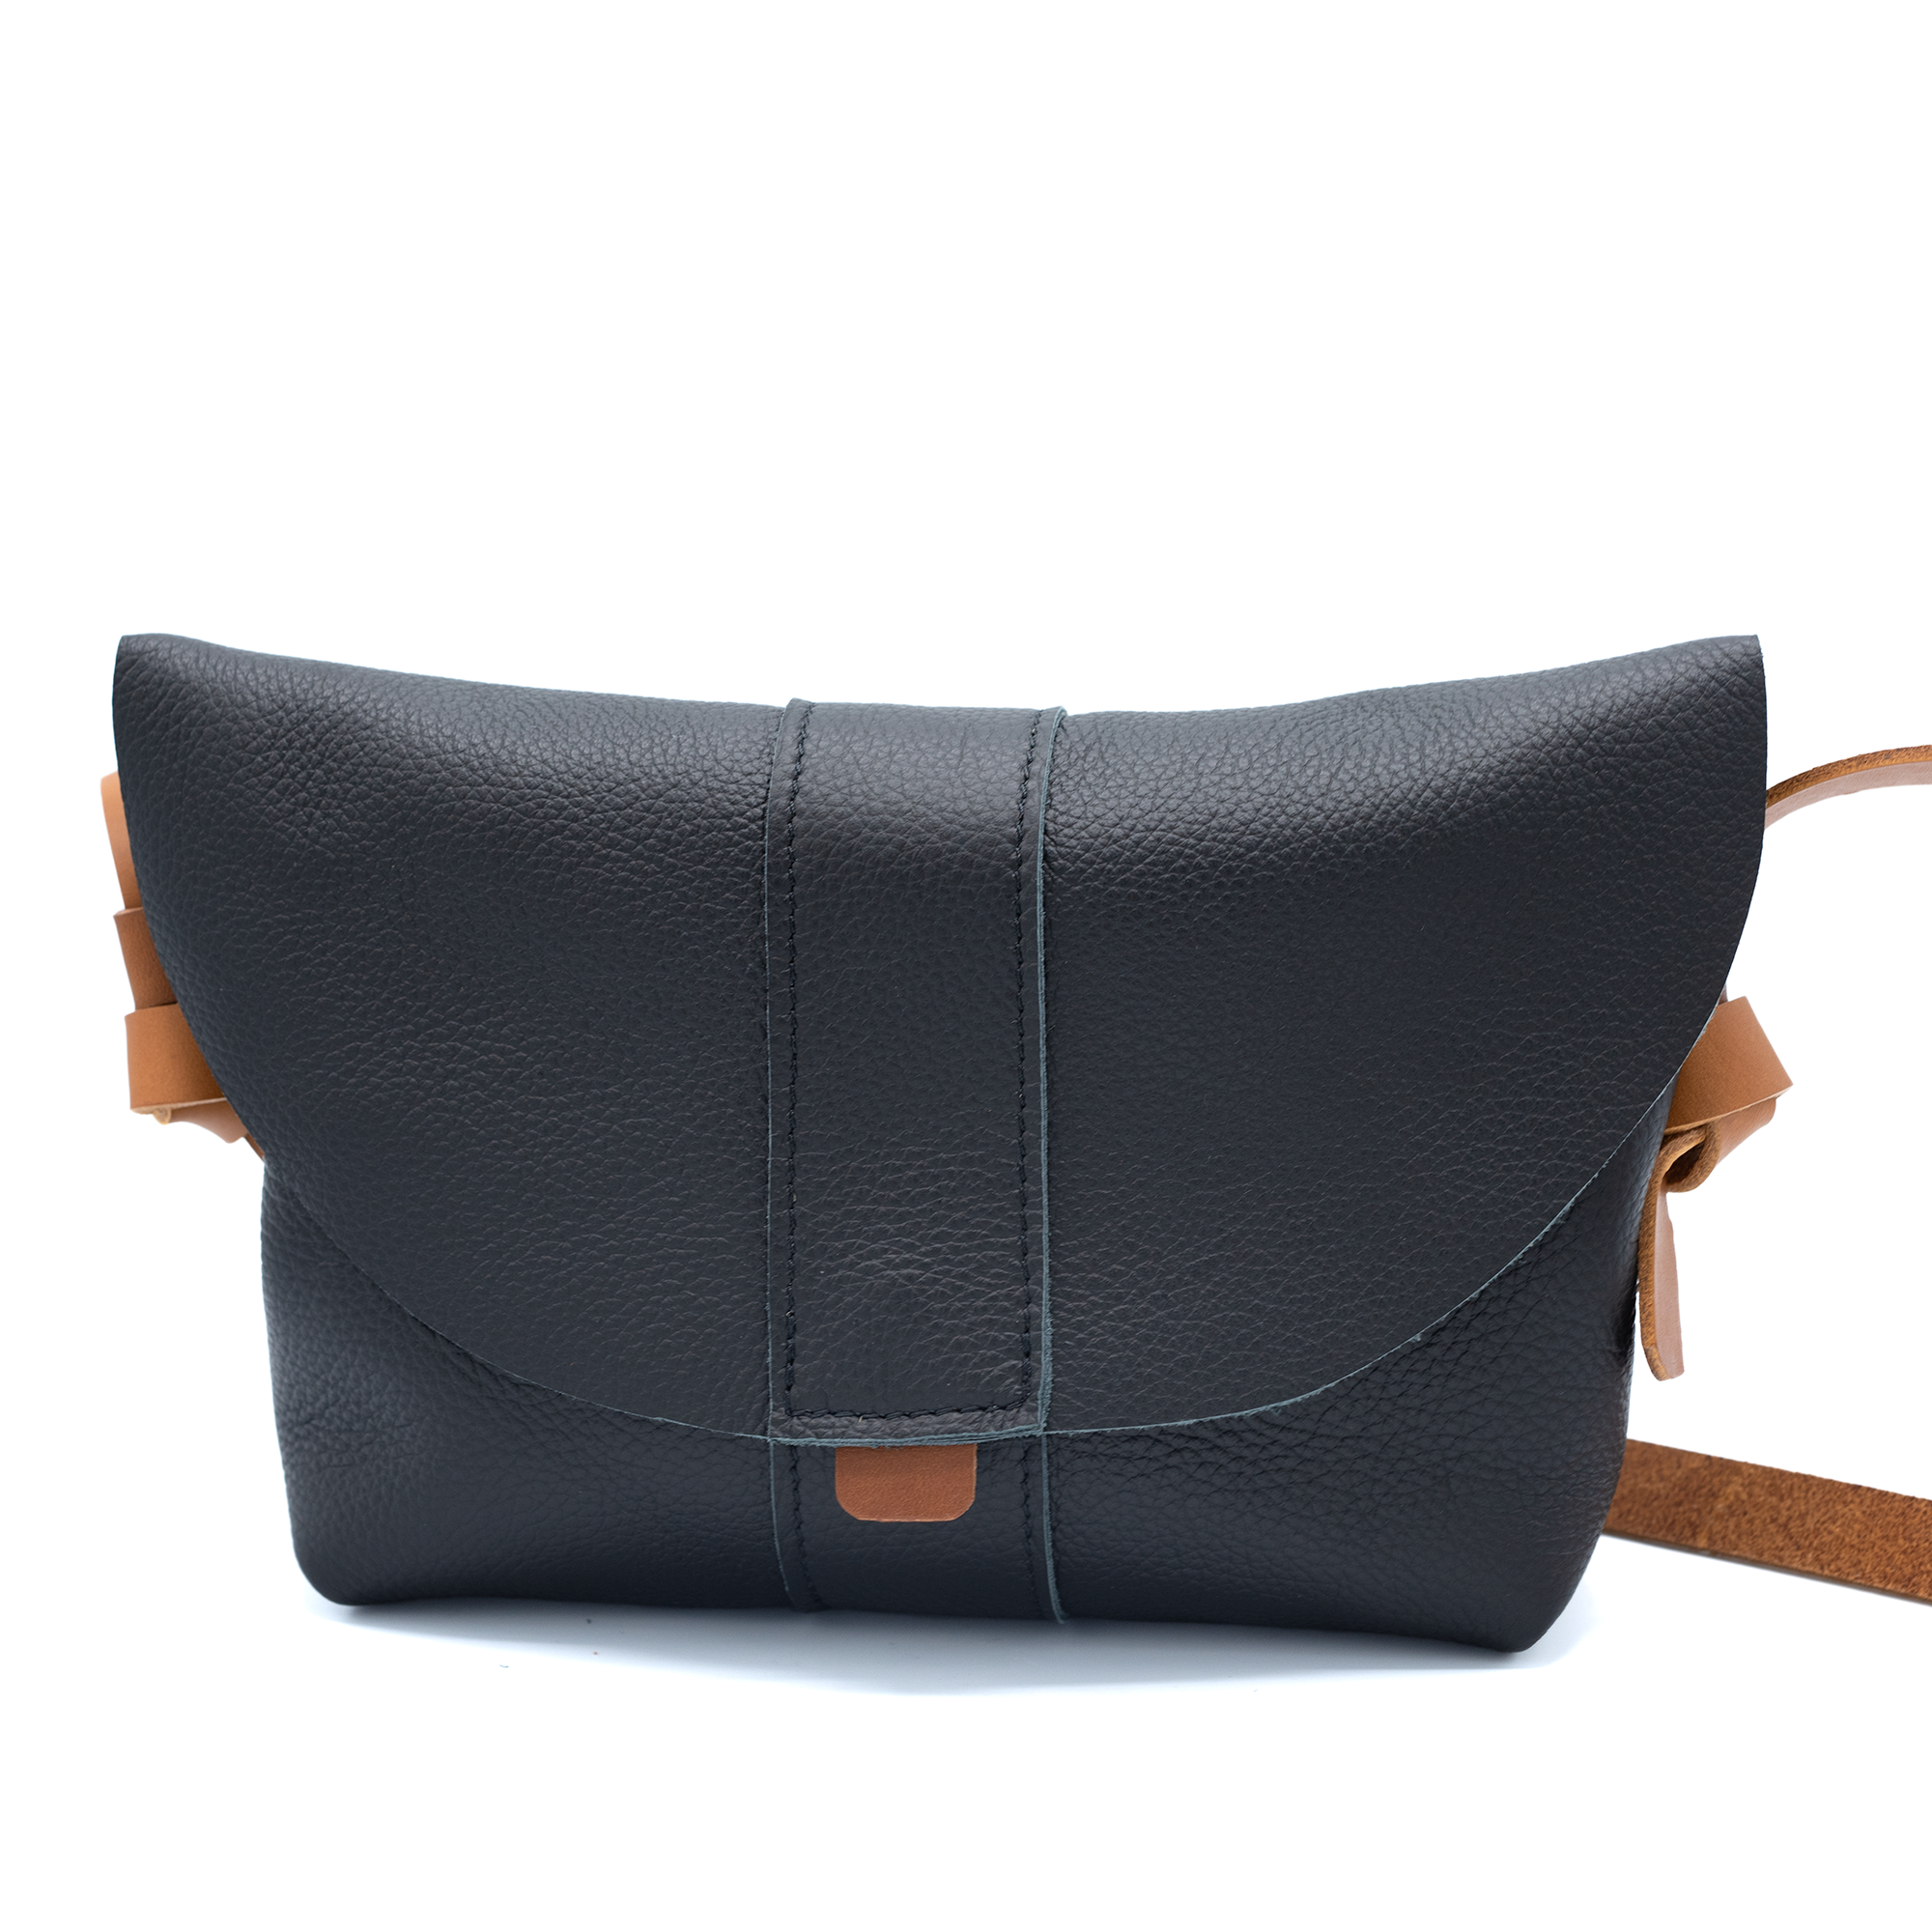 Image of a navy leather bag with white background.